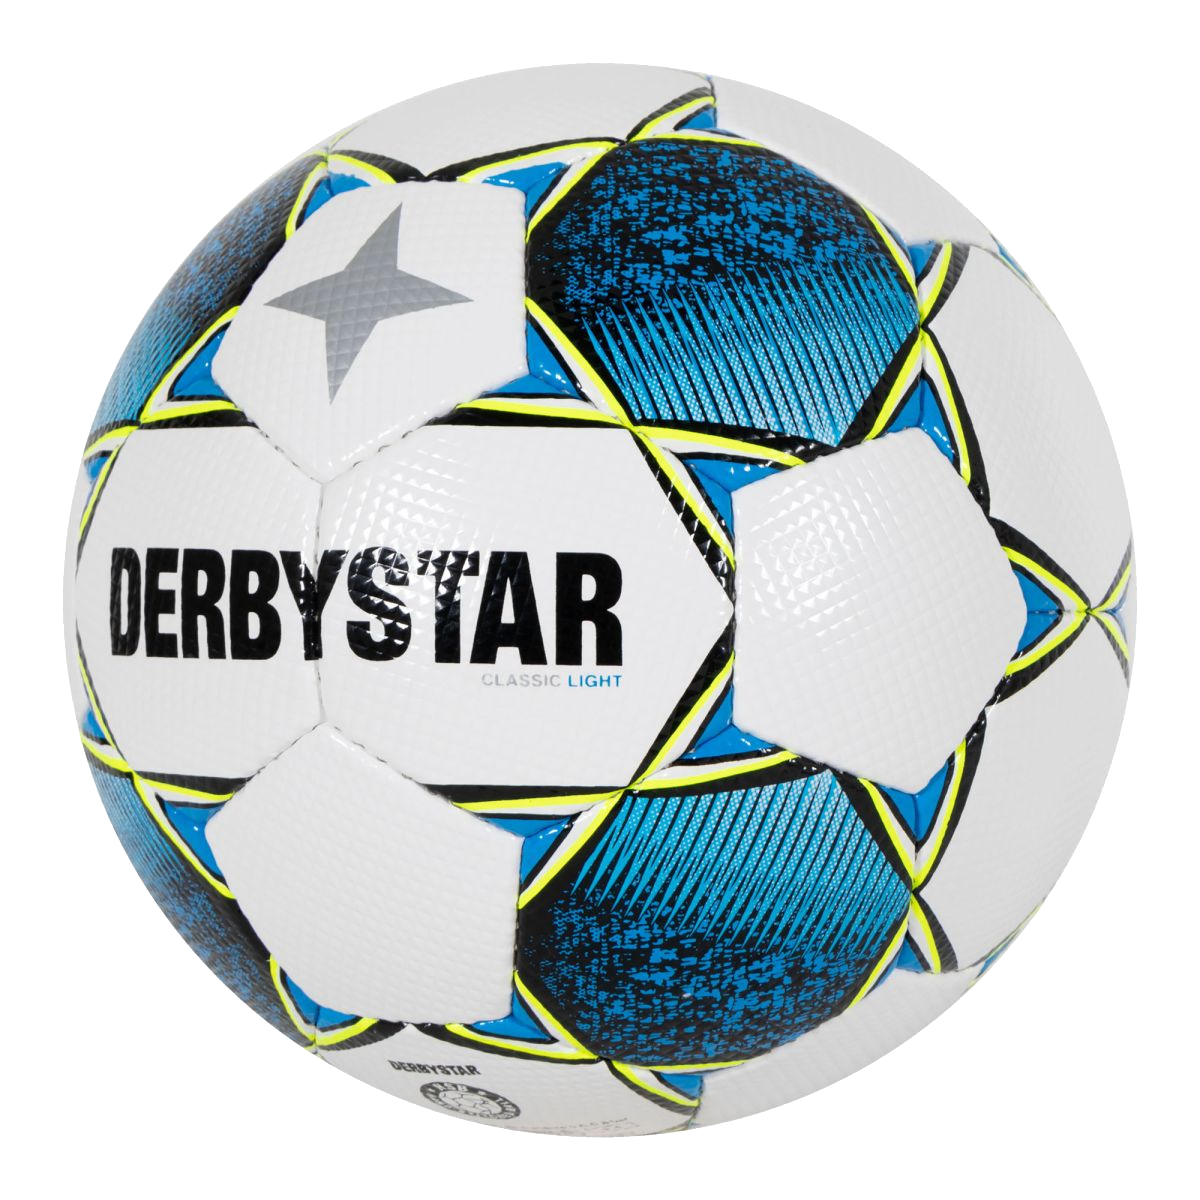 Derby Star Classic Light voetbal